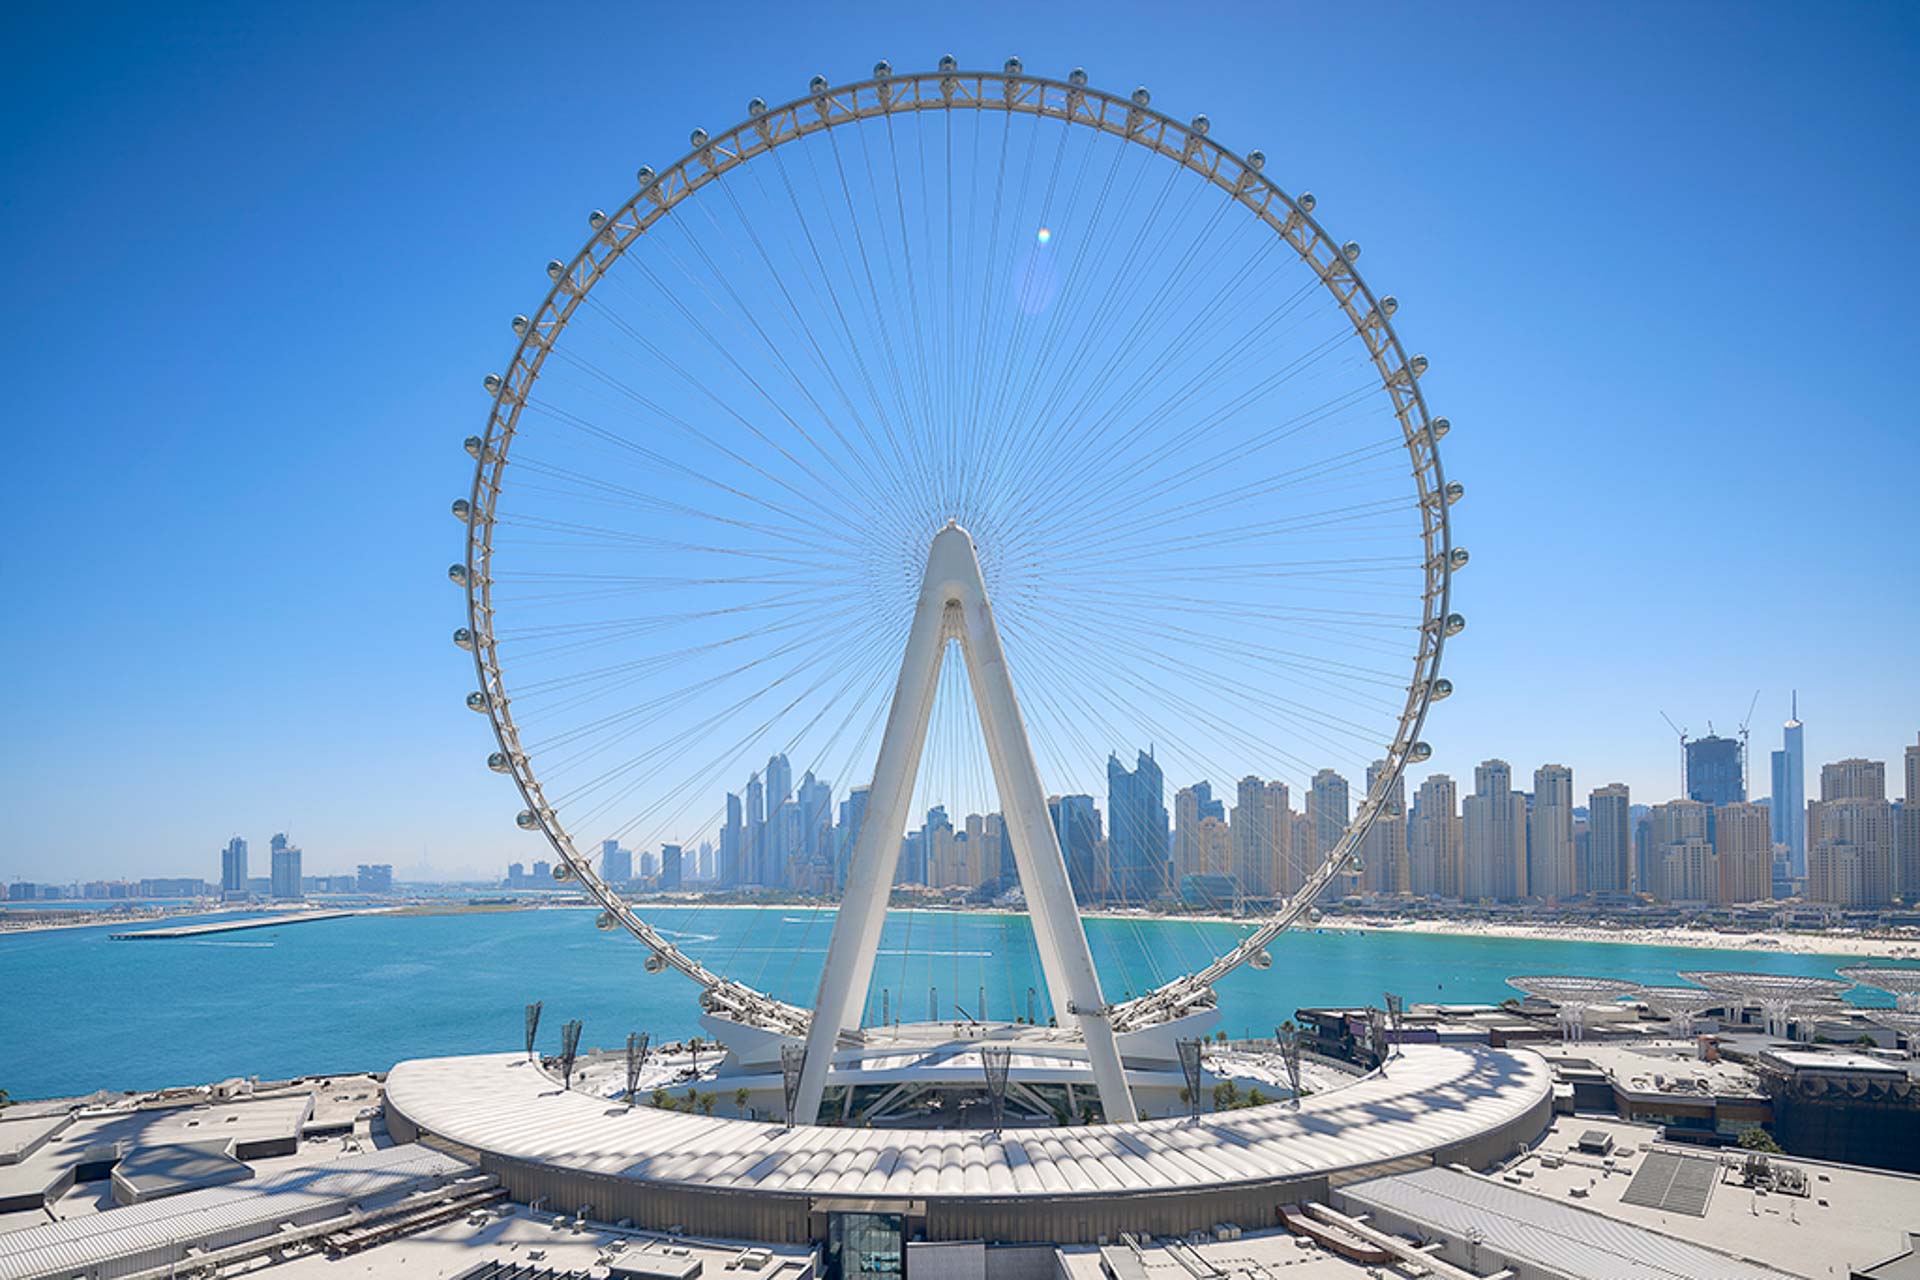 front view of the large wheel in Dubai, the Ain Dubai